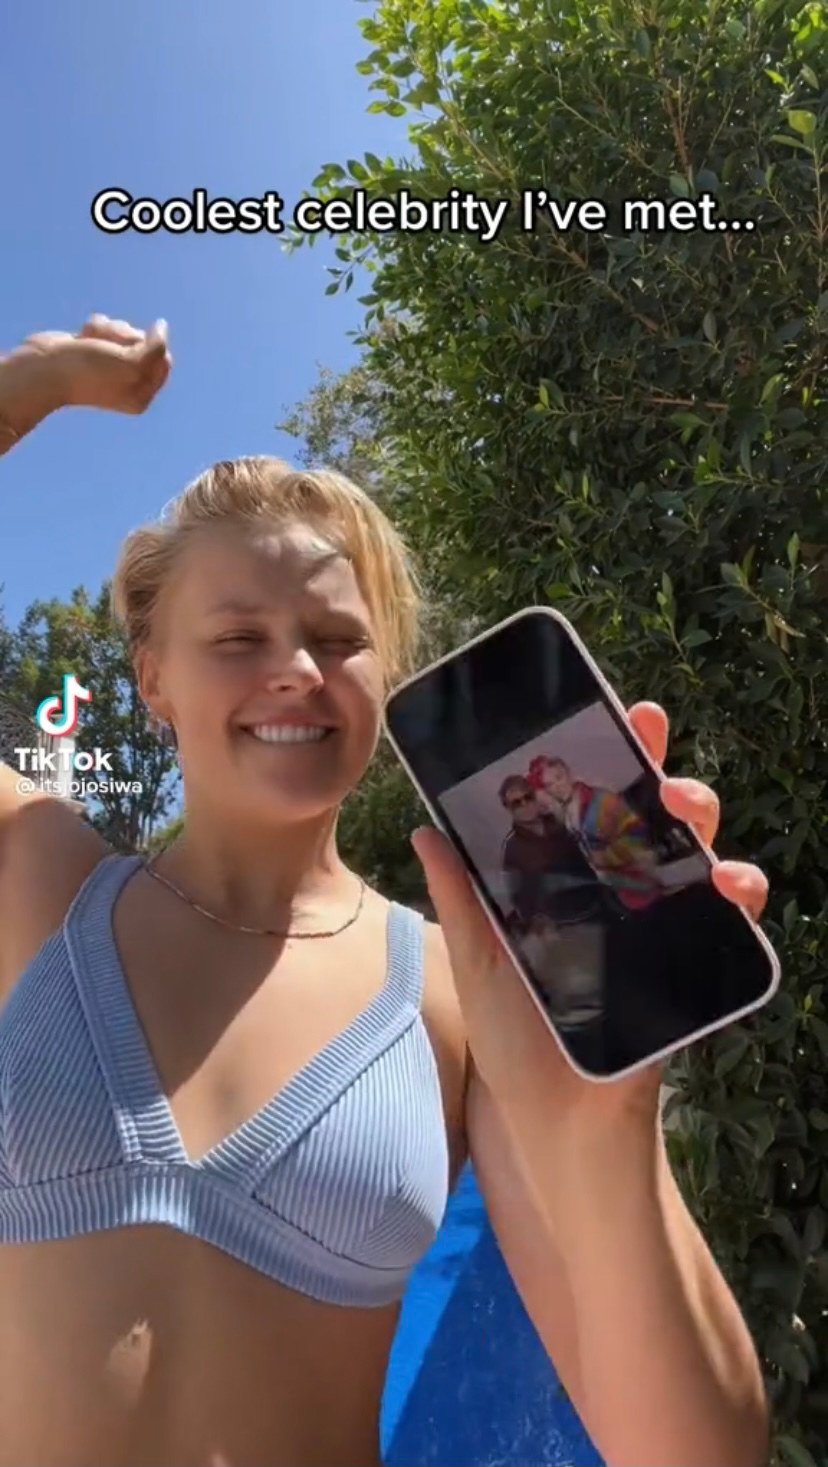 JoJo holds up her phone with a photo of Elton John